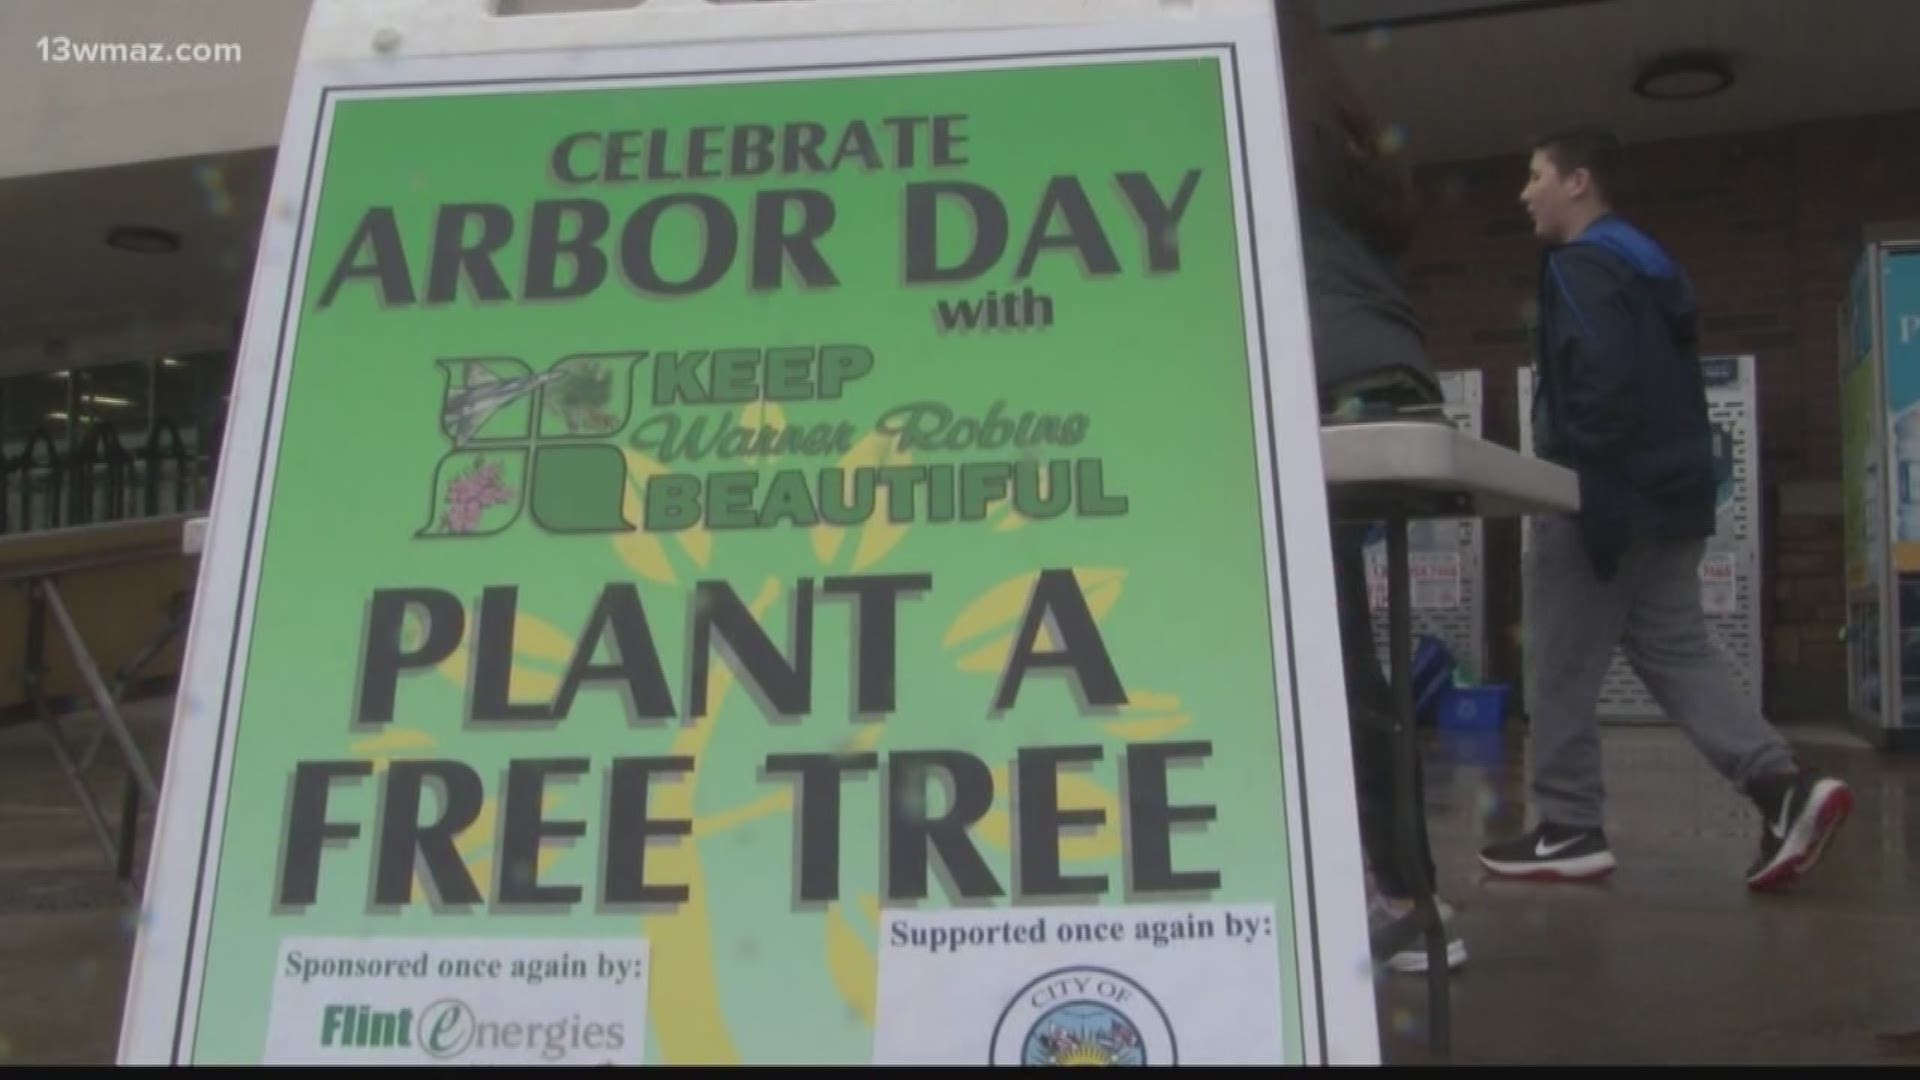 Keep Warner Robins Beautiful's Youth Advisory Board gave out seedlings Saturday in honor of Arbor Day.